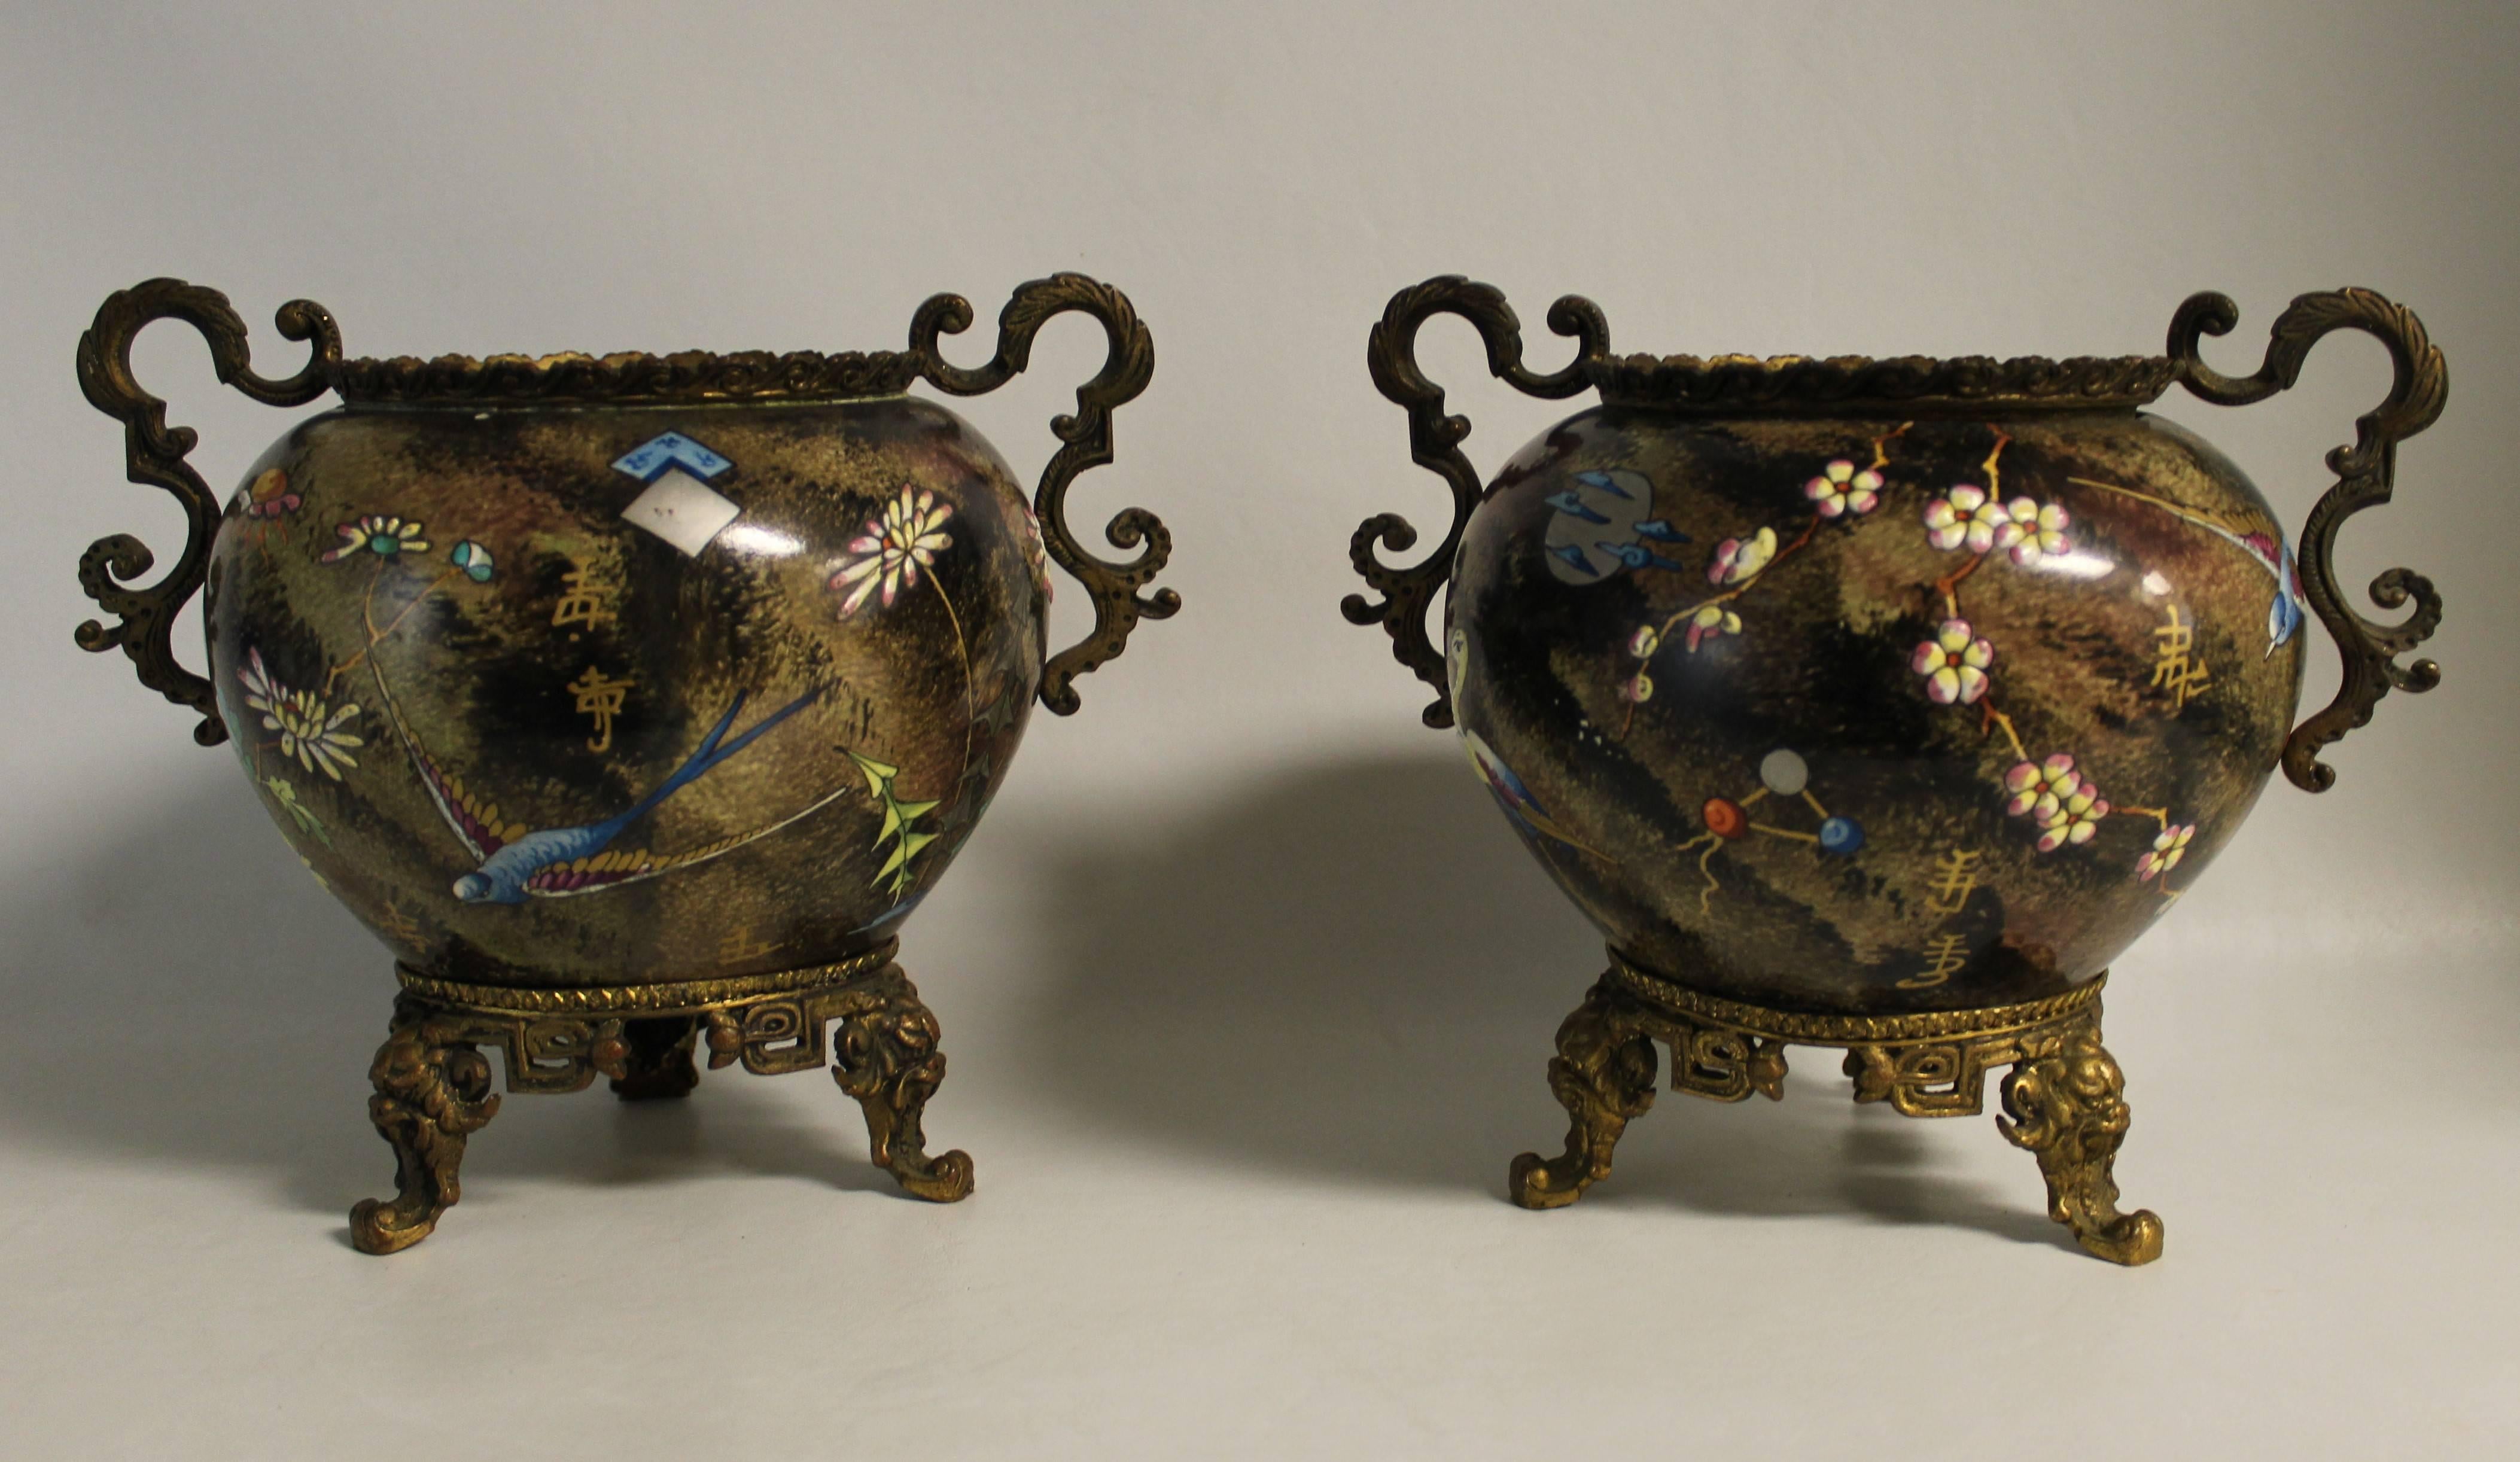 Pair of Japonism porcelain and ormolu-mounted Aesthethic Movement vase's.